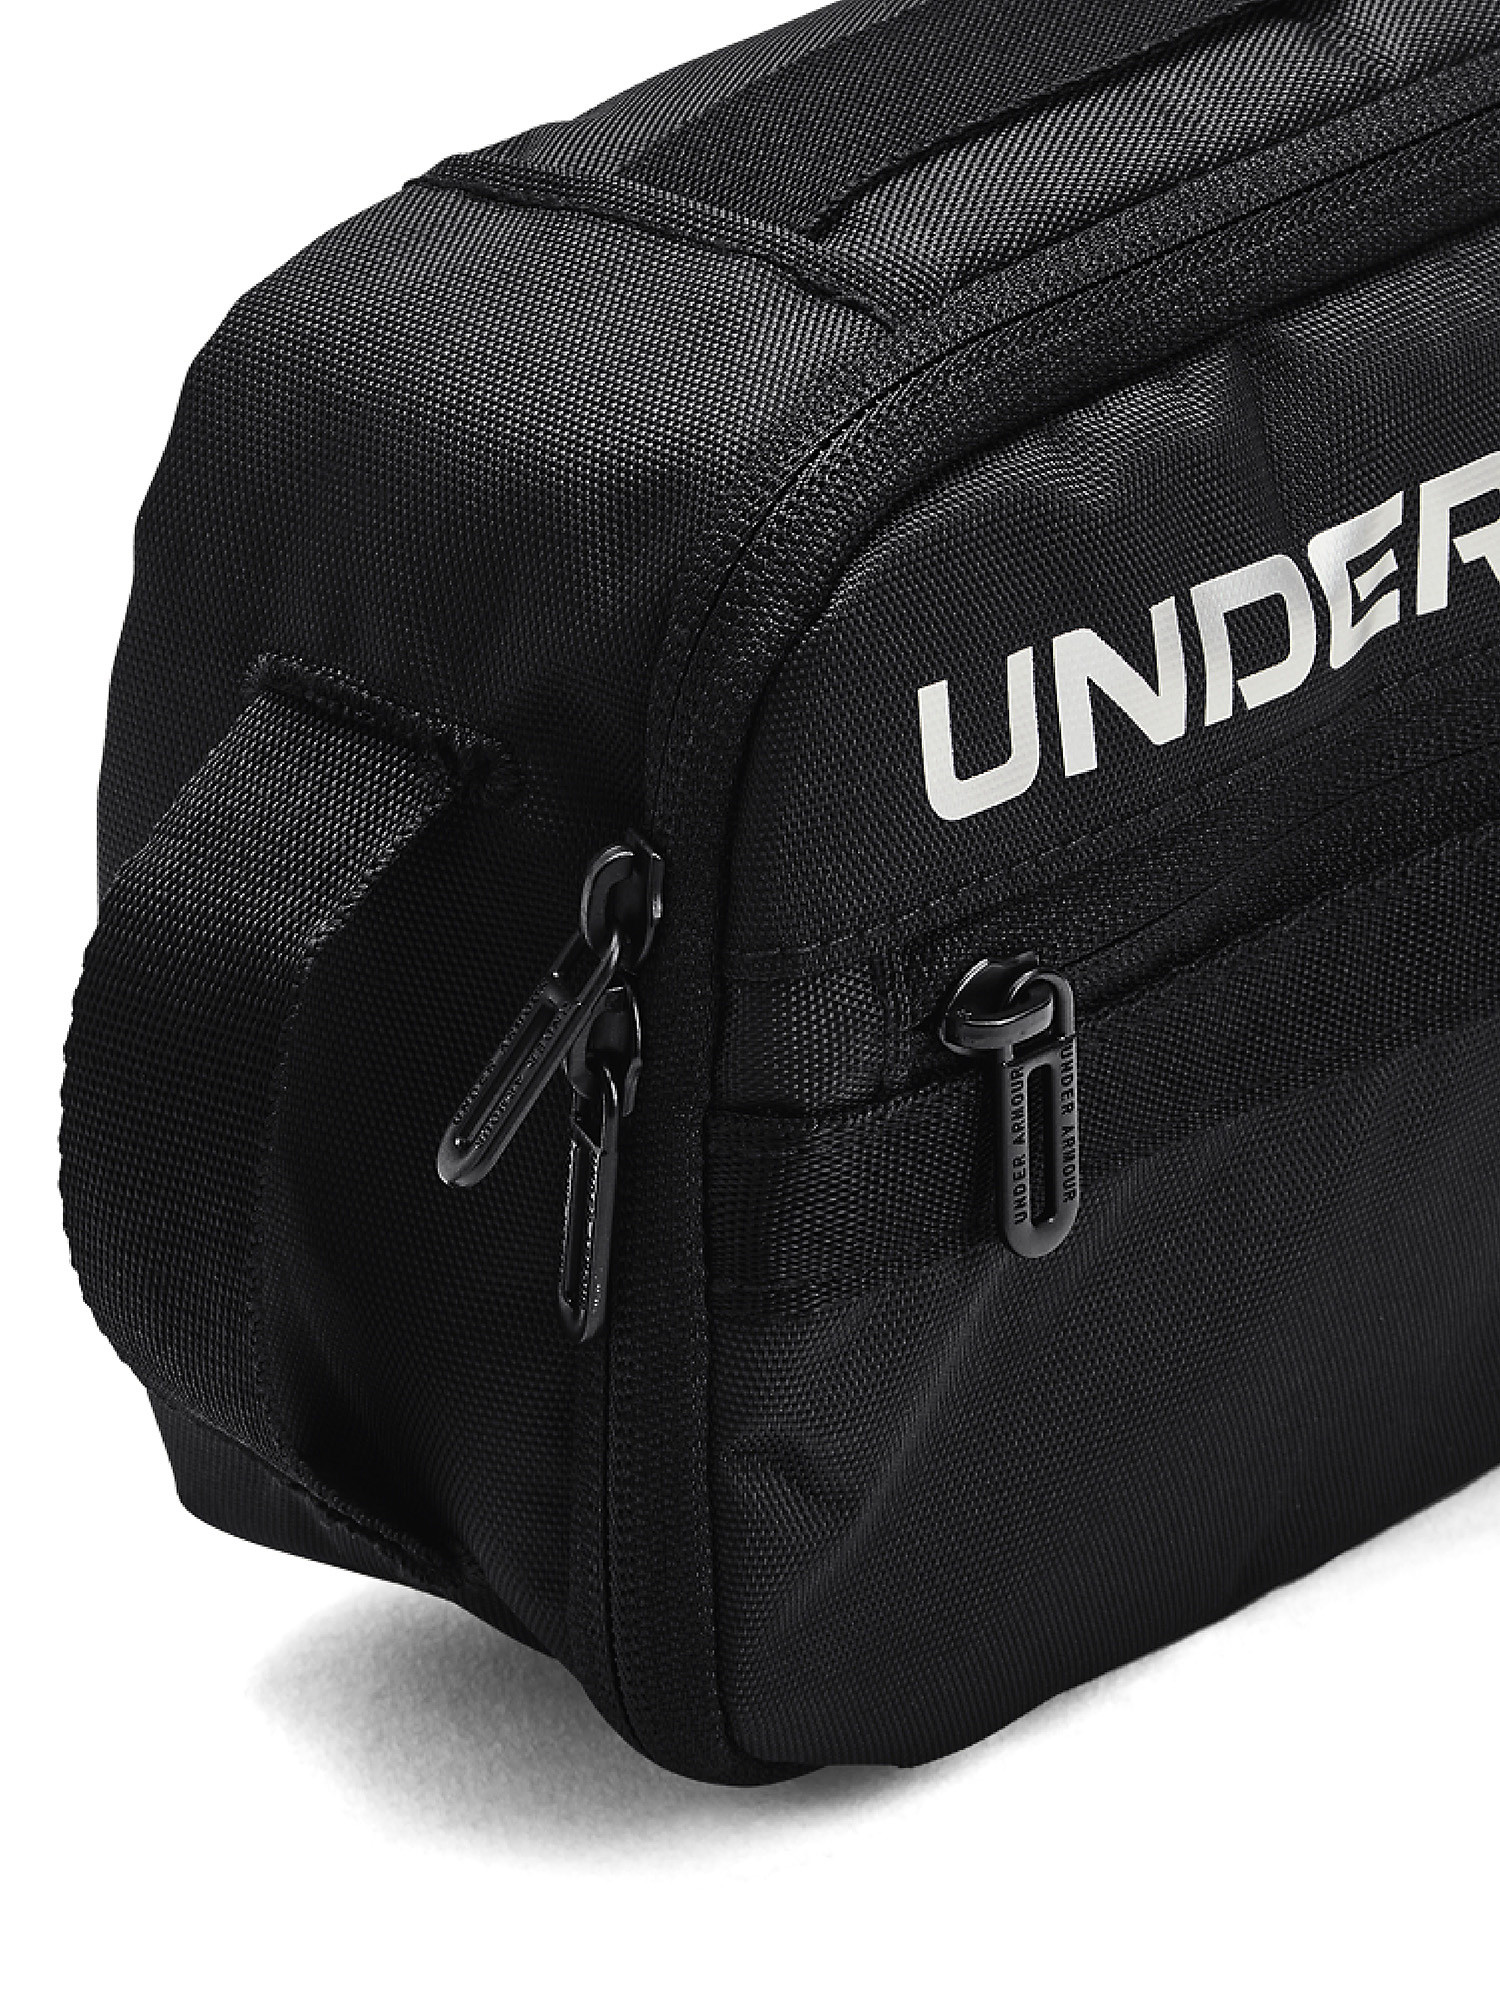 Under Armour - UA Contain Travel Travel Kit, Black, large image number 2